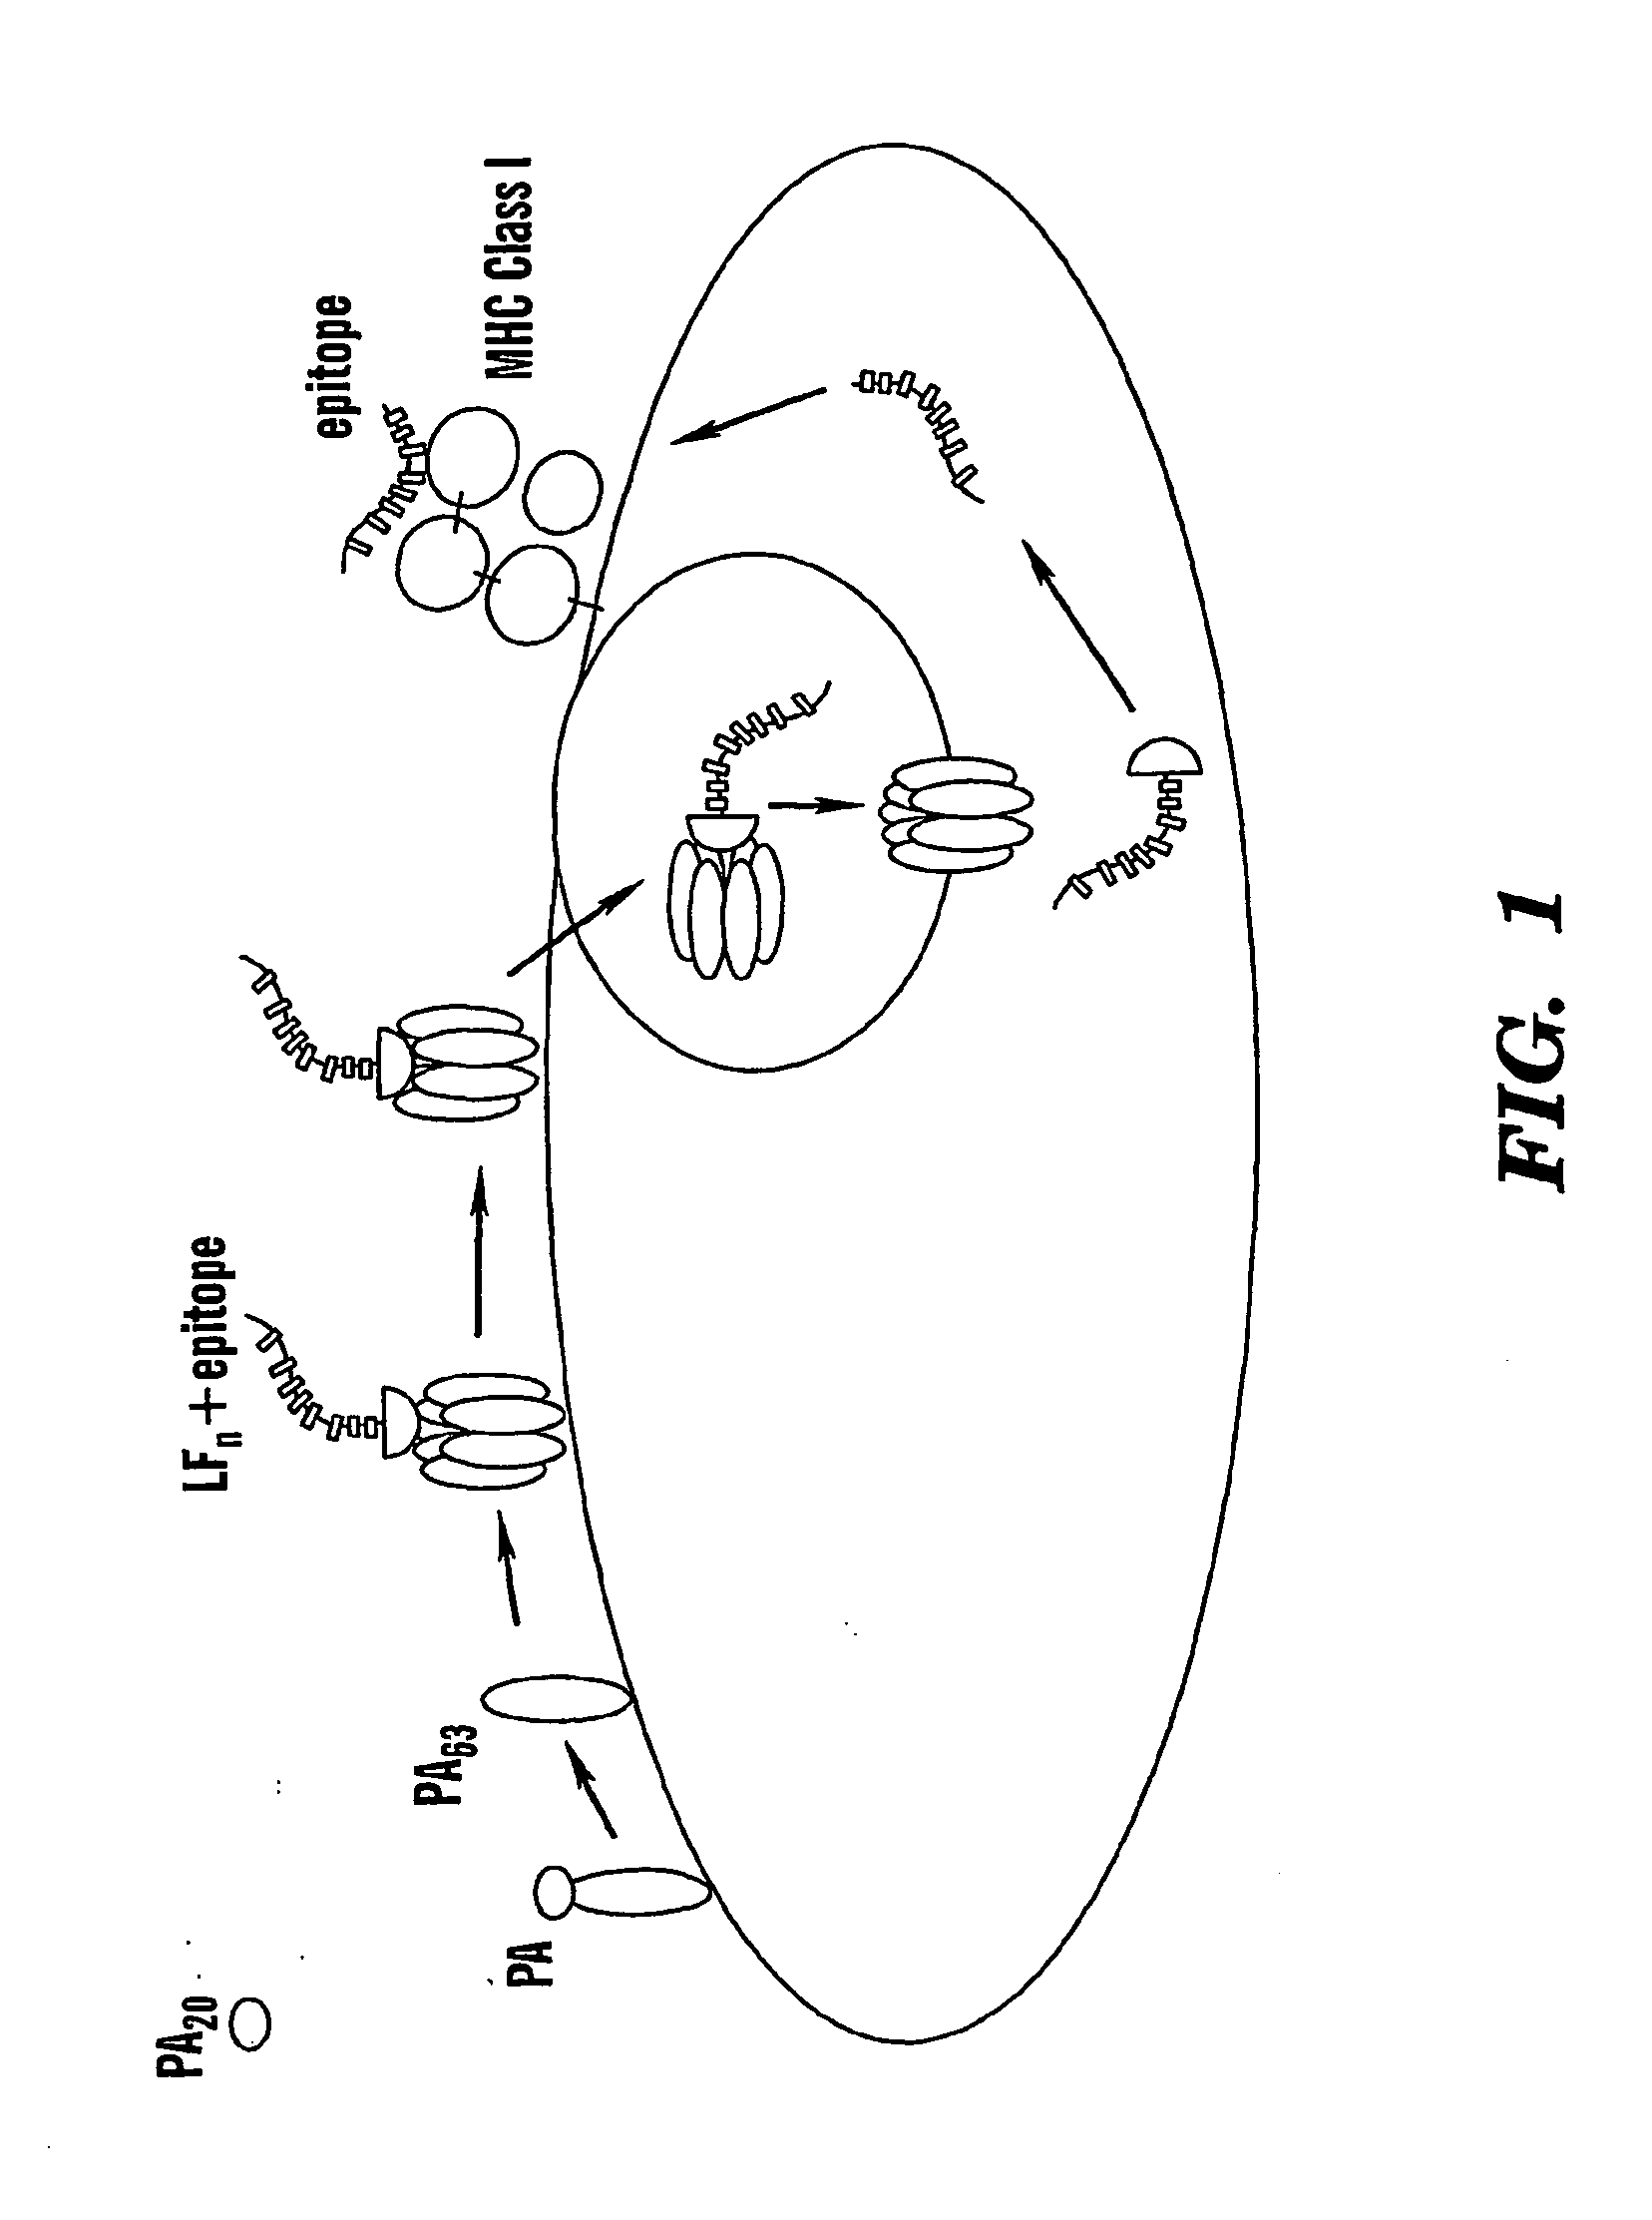 Methods of delivery of exogenous proteins to the cytosol and uses thereof